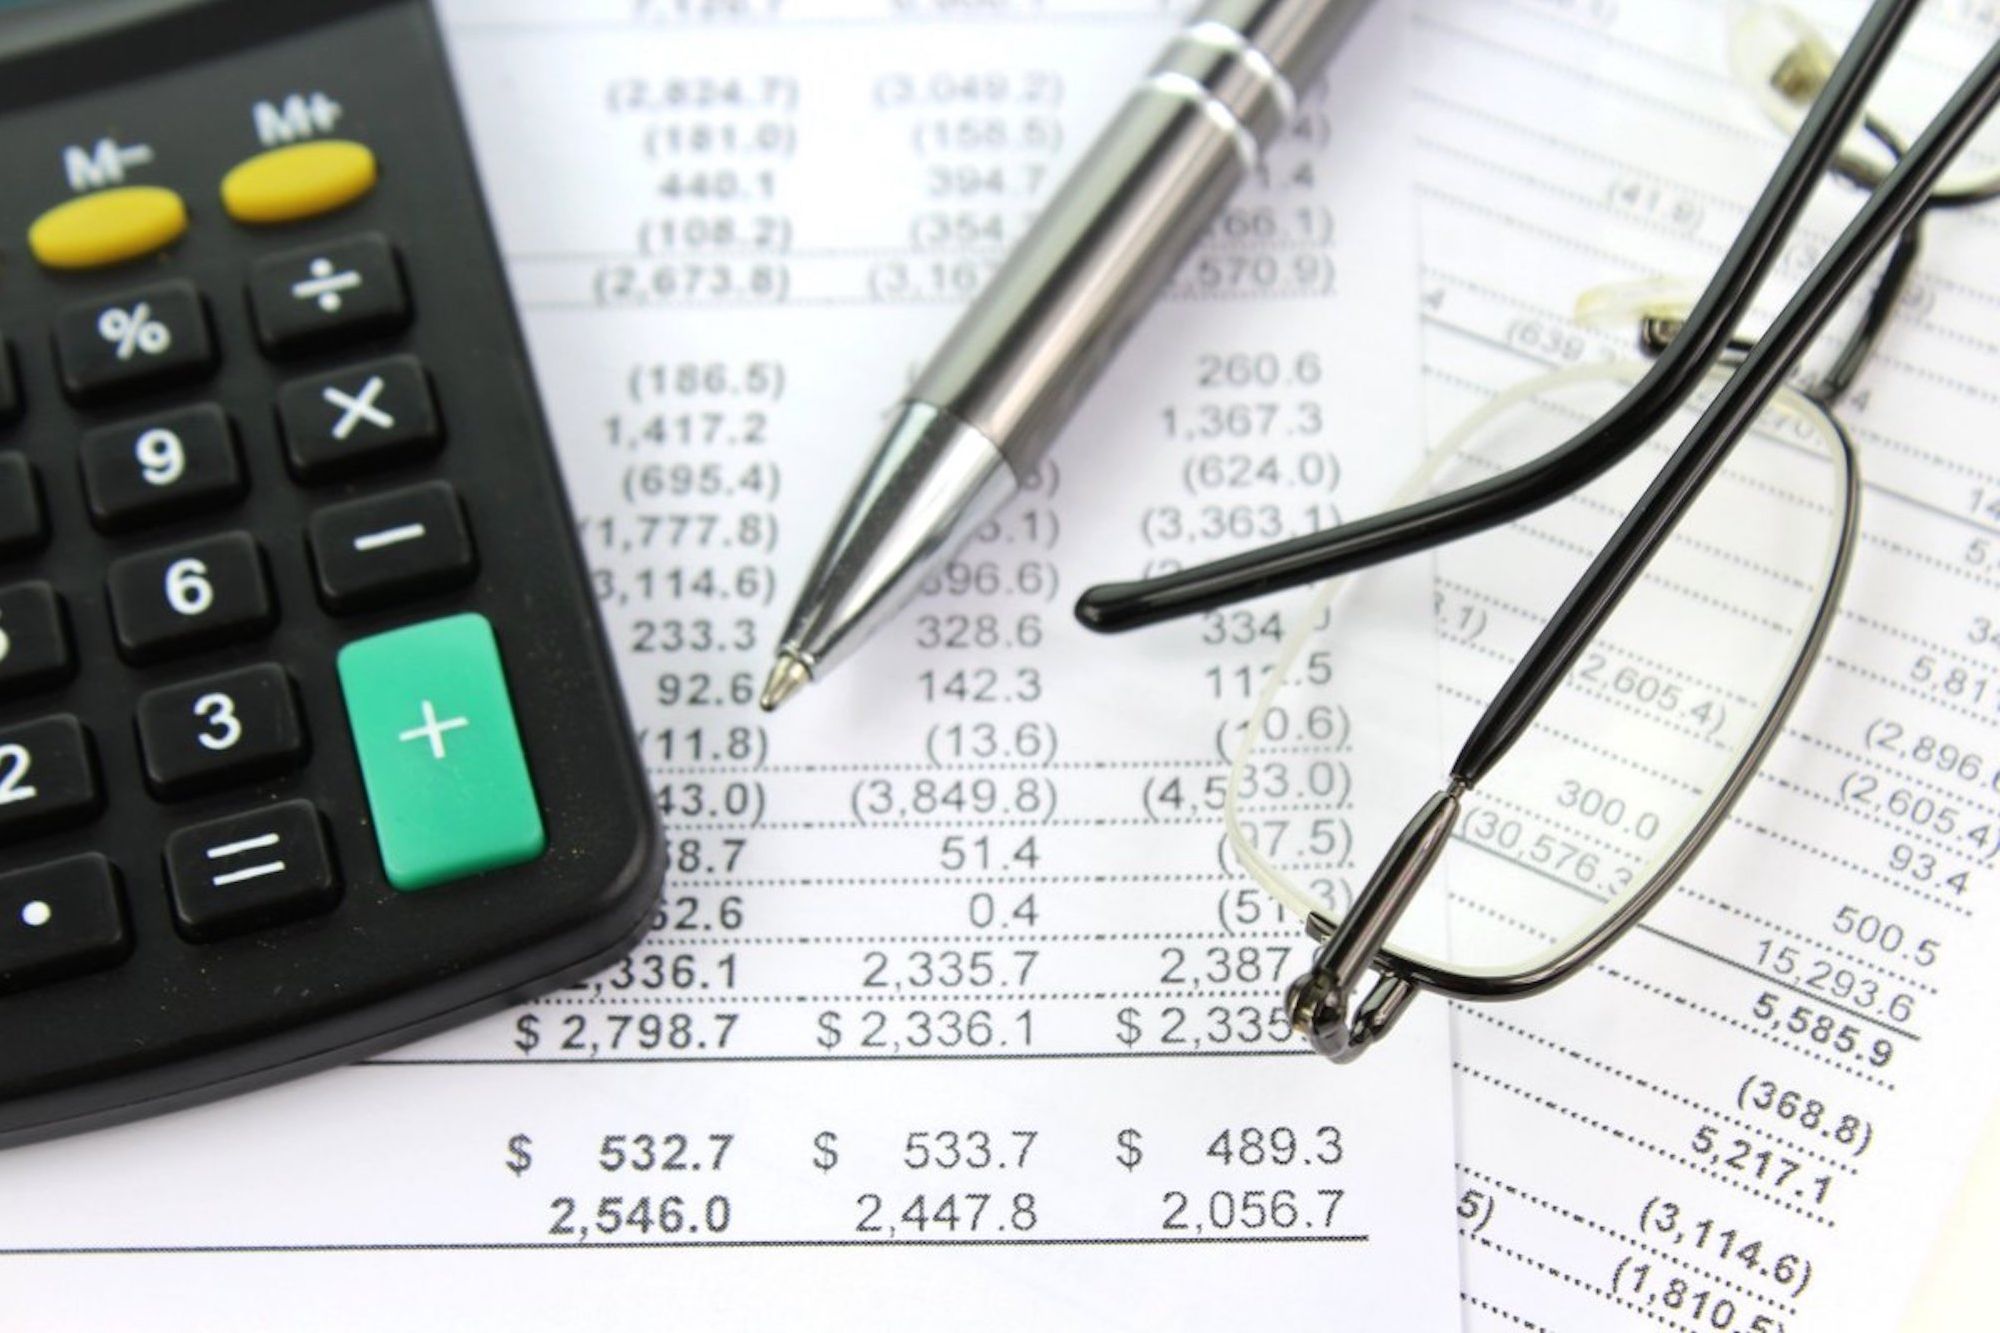 Need Accounting Help? Learn How to Use QuickBooks for Less Than $20.